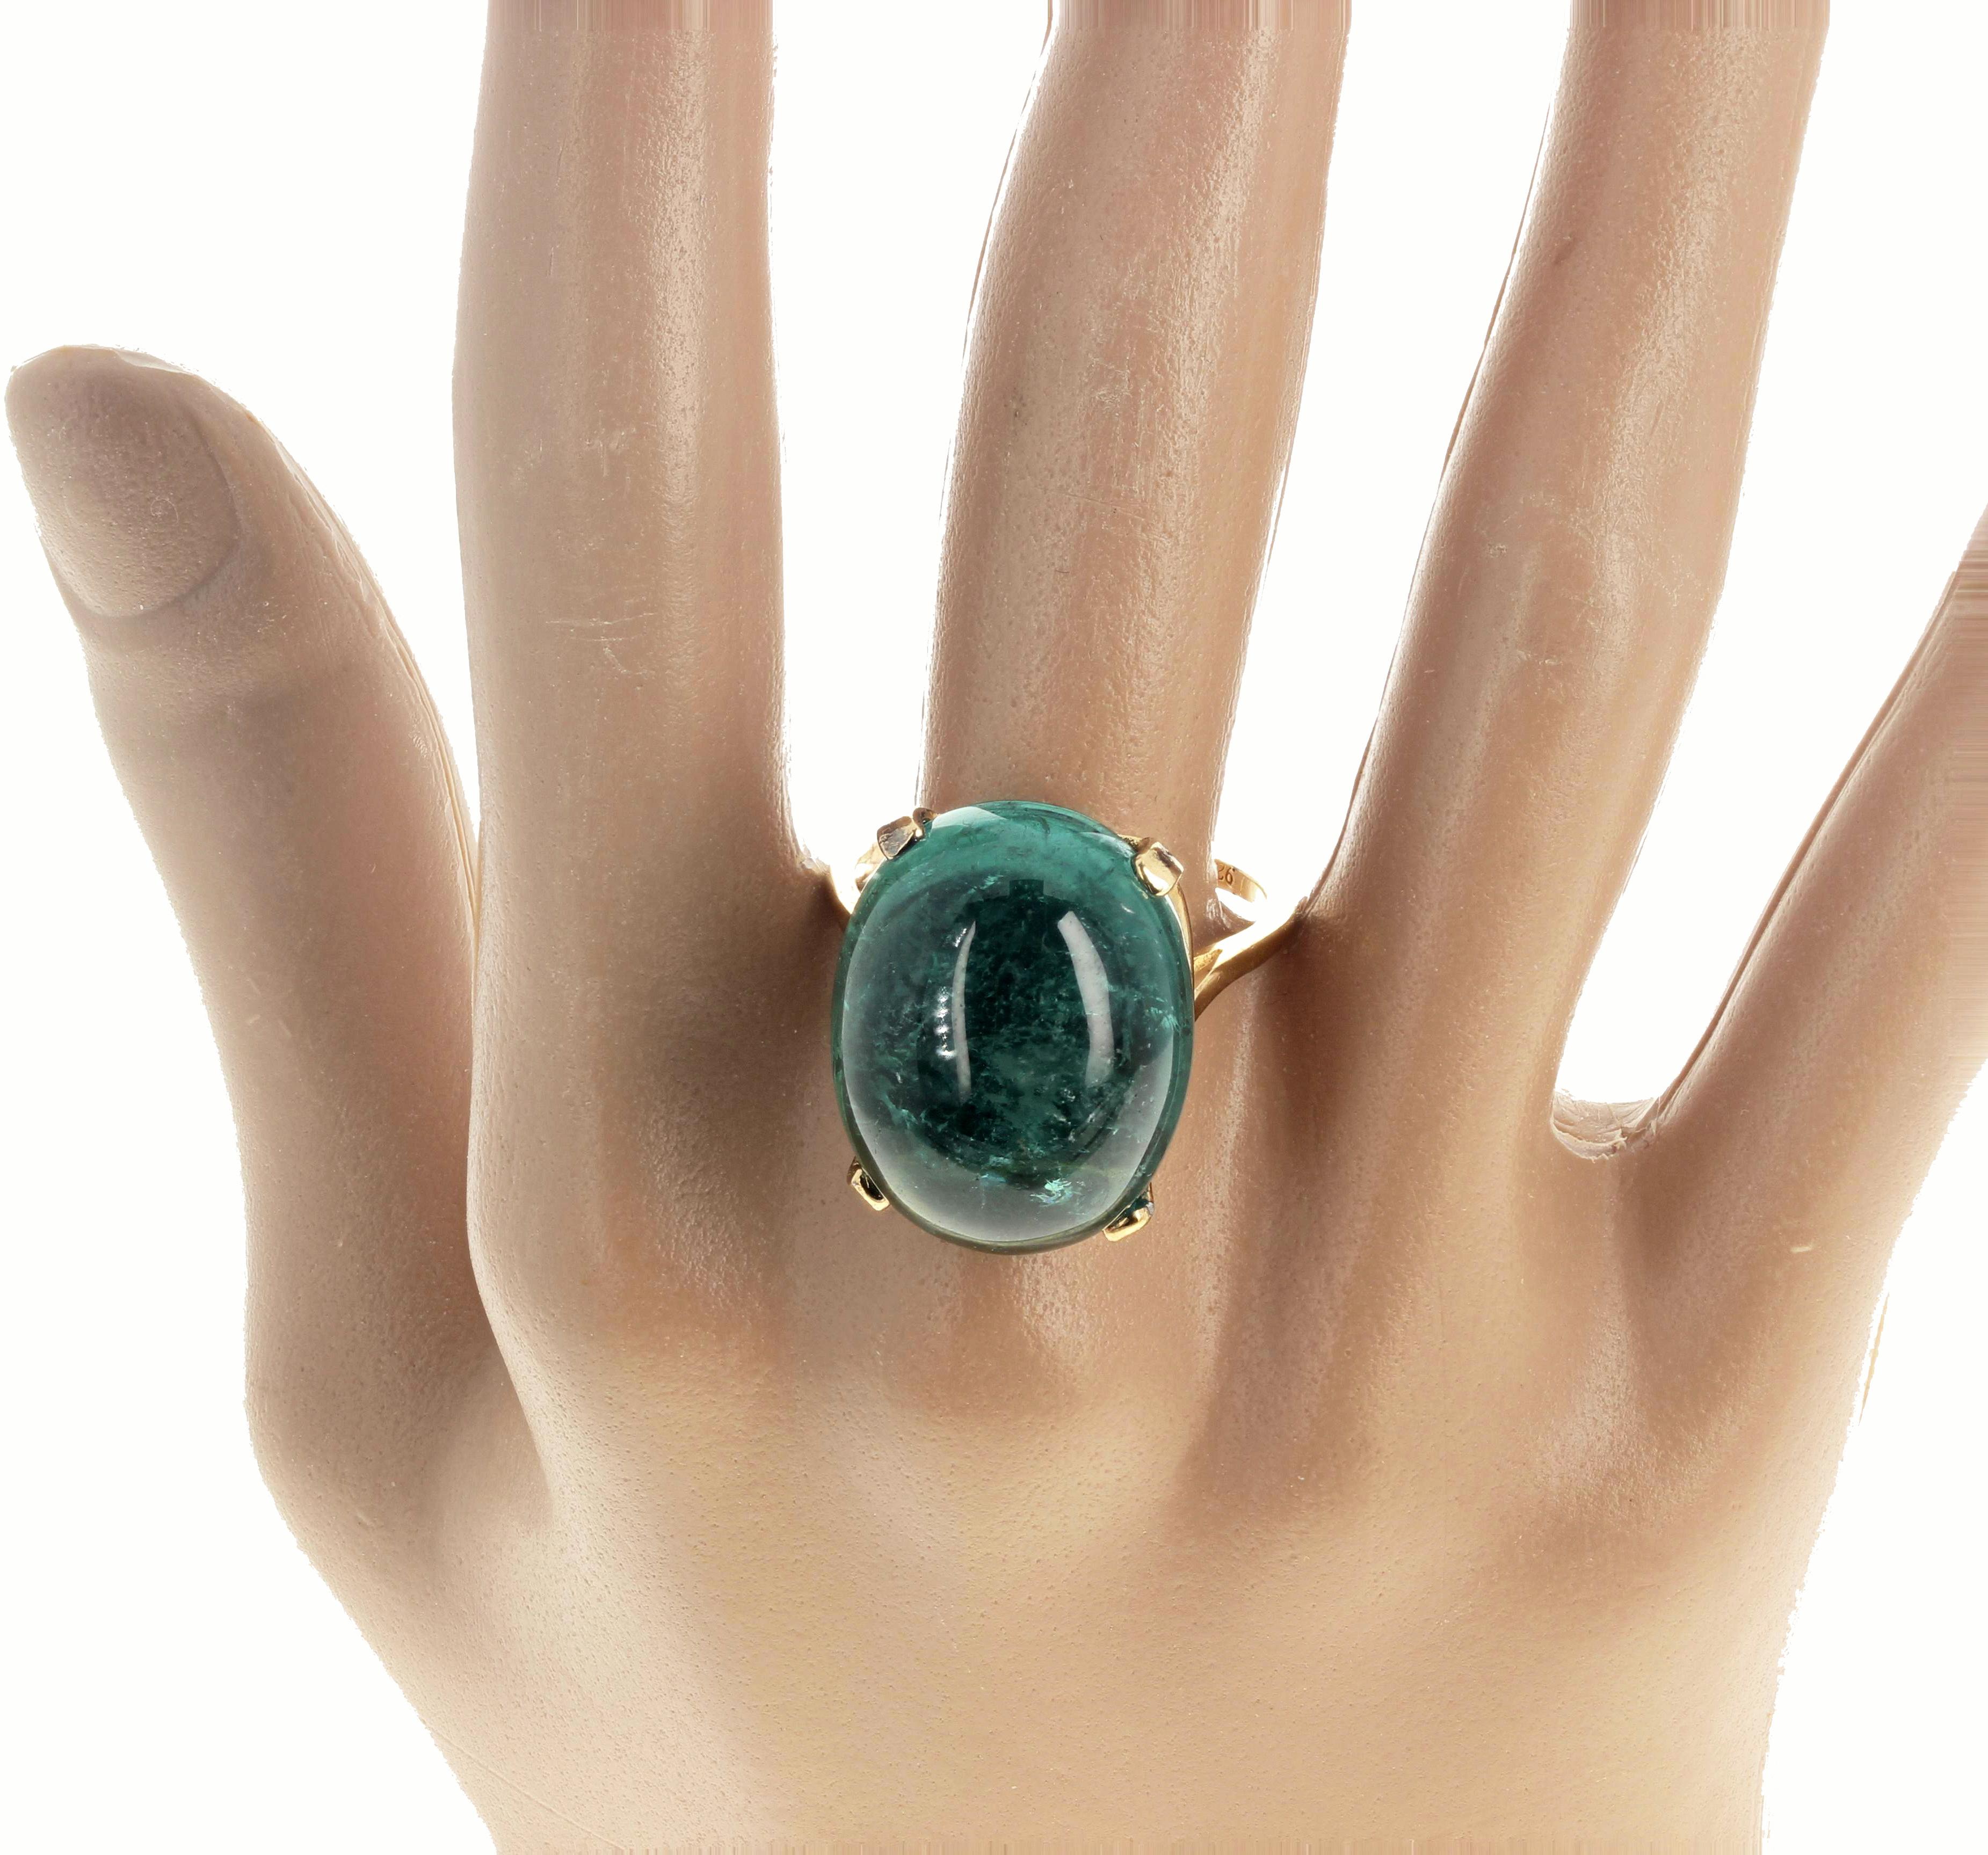 Women's or Men's AJD Glowing Natural Green 31 Ct. Tourmaline Cabochon 14K Gold Ring